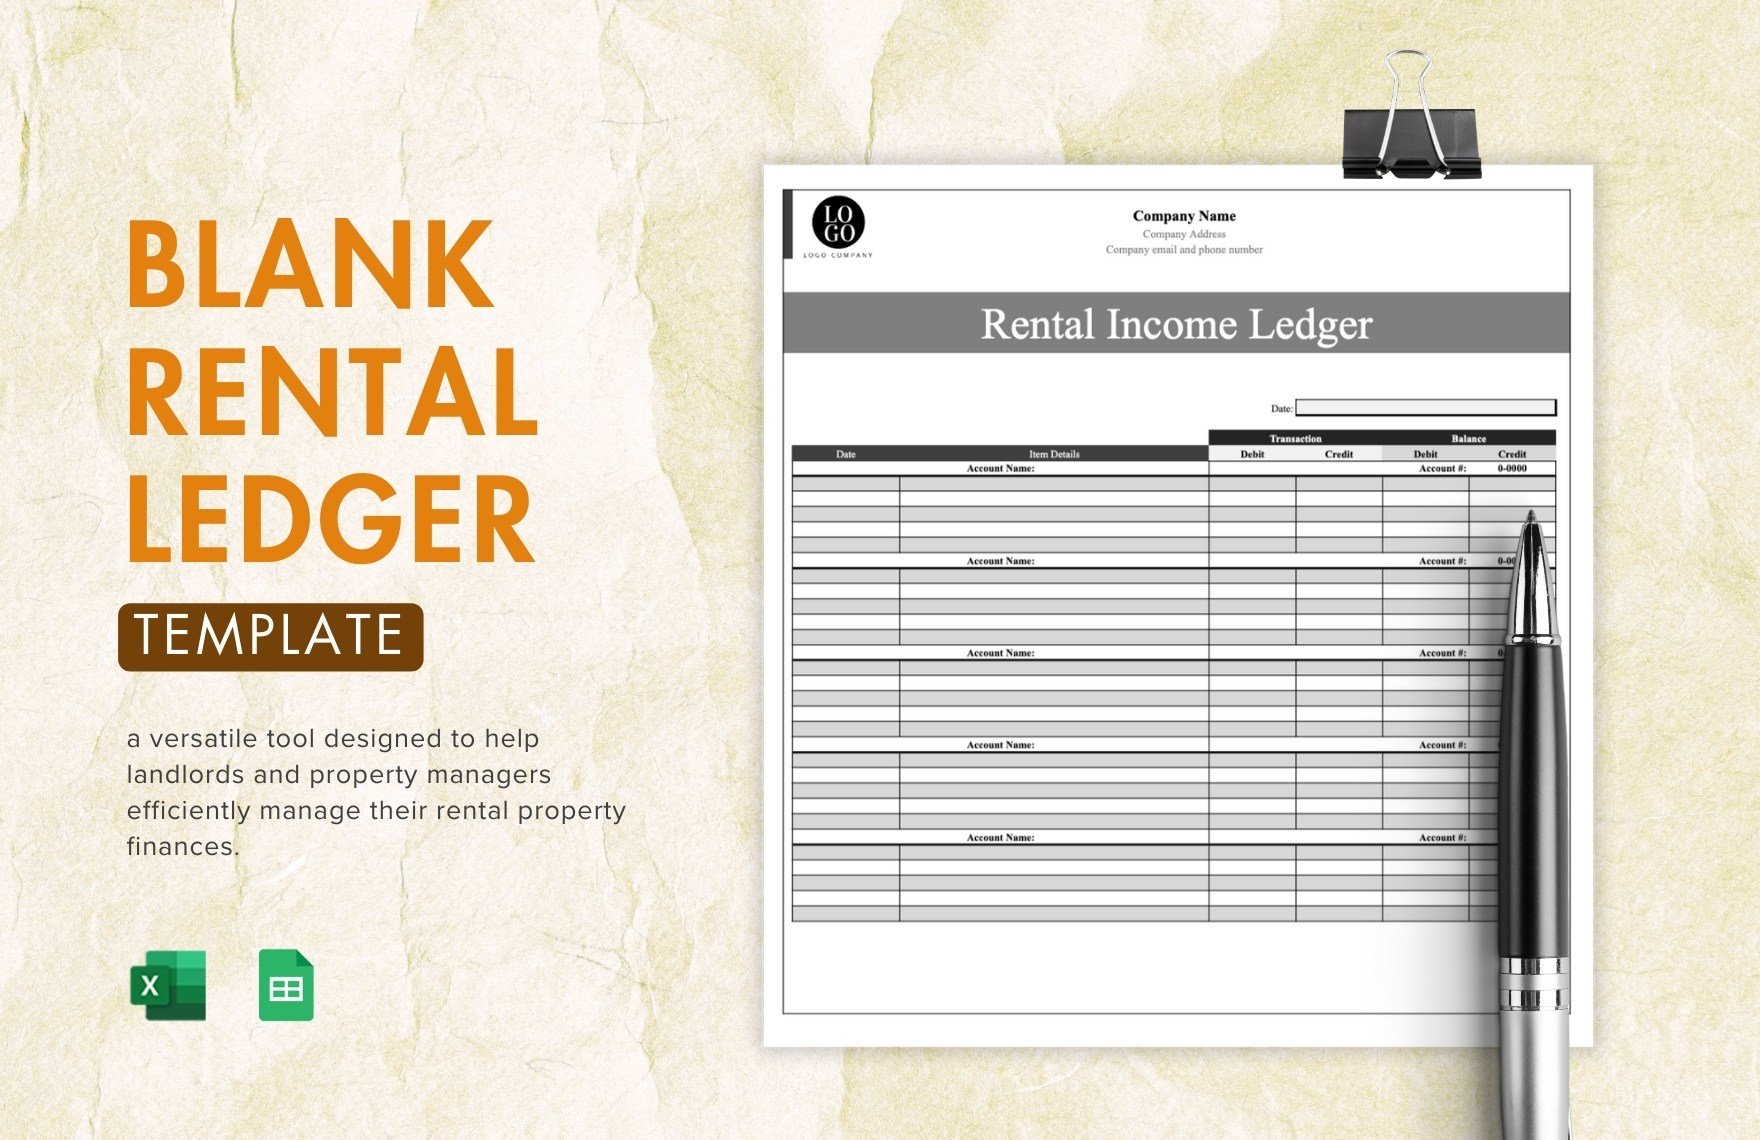 Free Blank Rental Ledger Template in Excel, Google Sheets